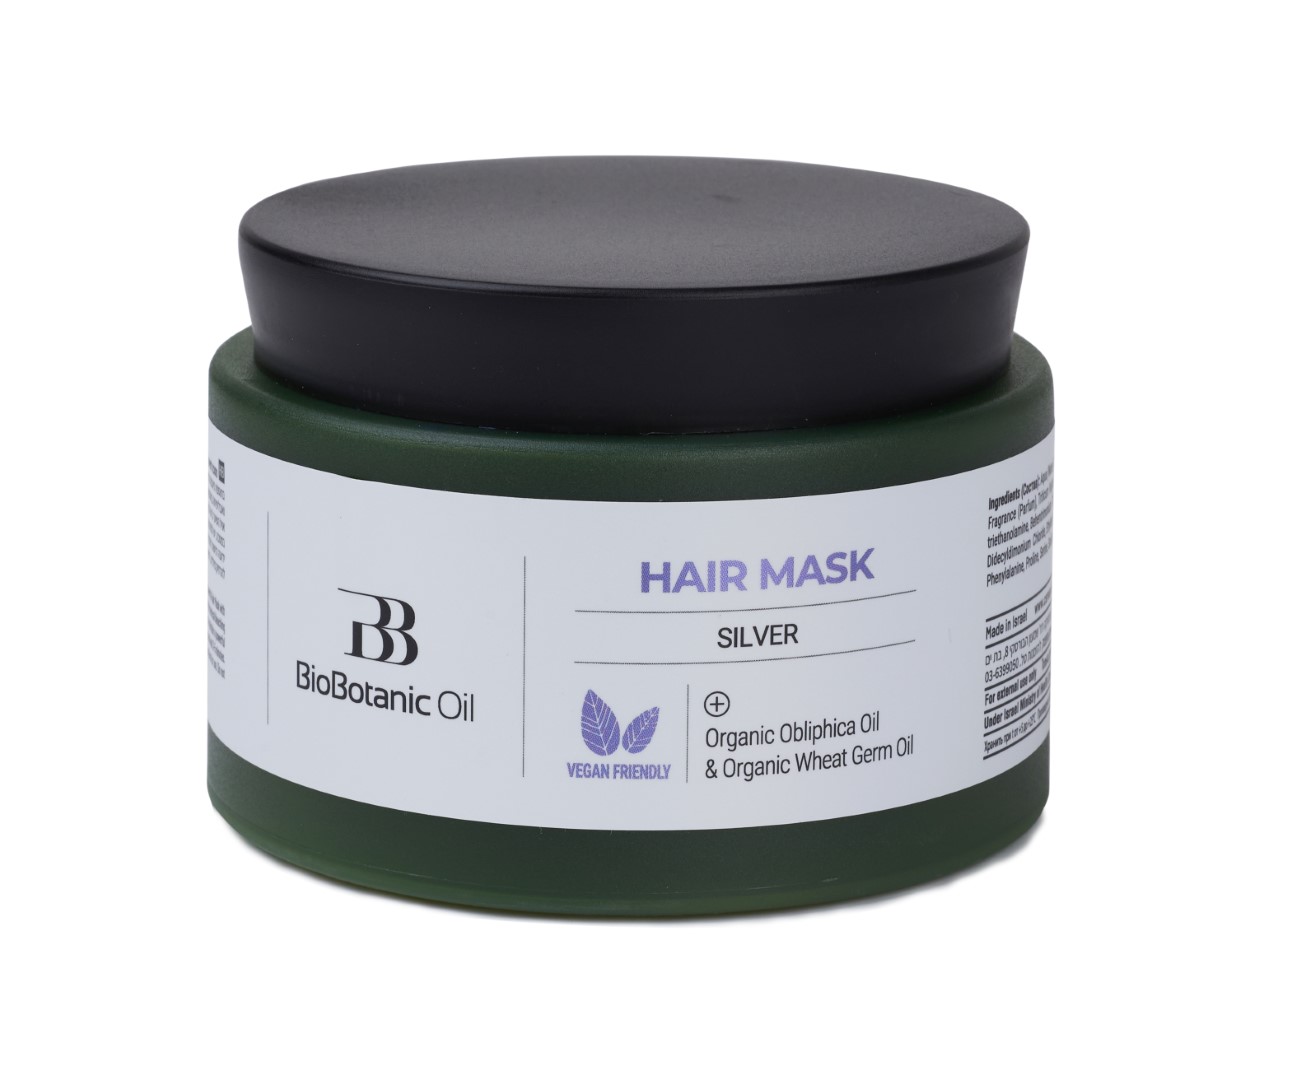 SILVER mask for blonde and lightened hair